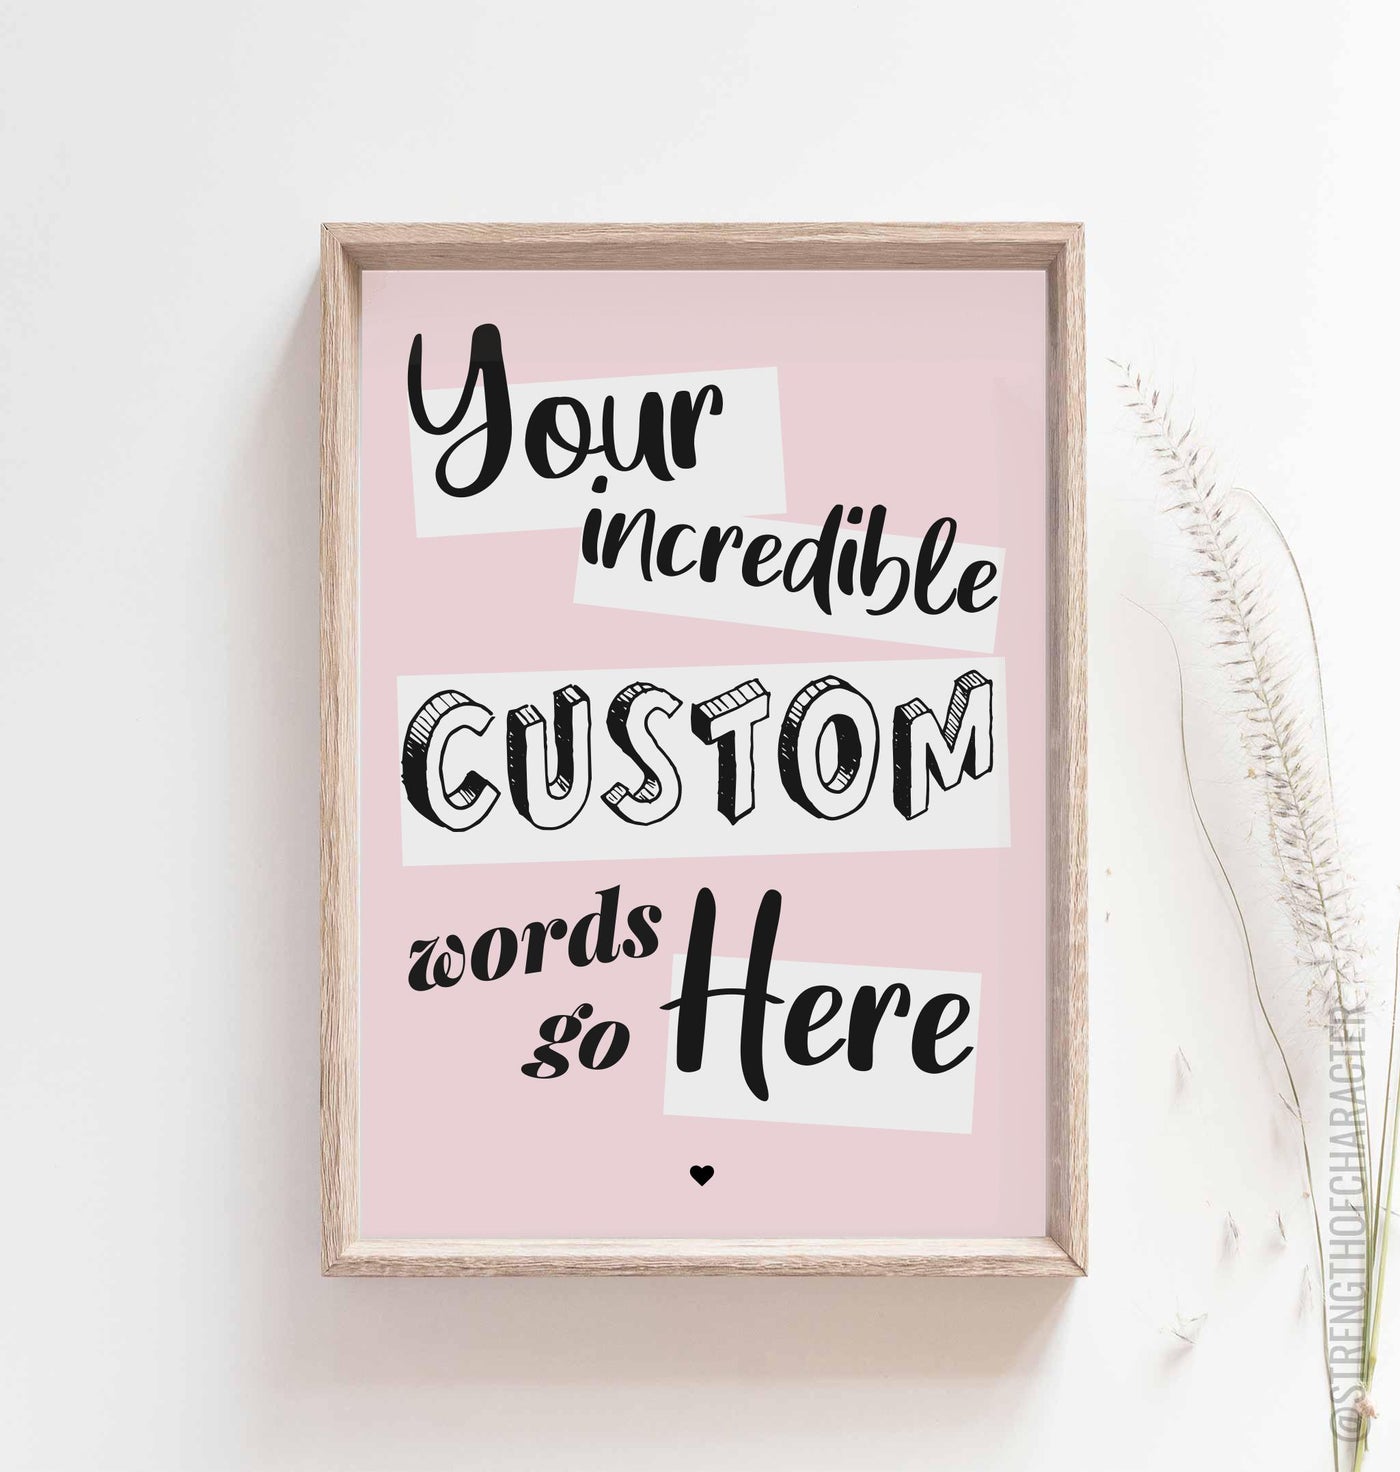 Personalised wall art prints collection